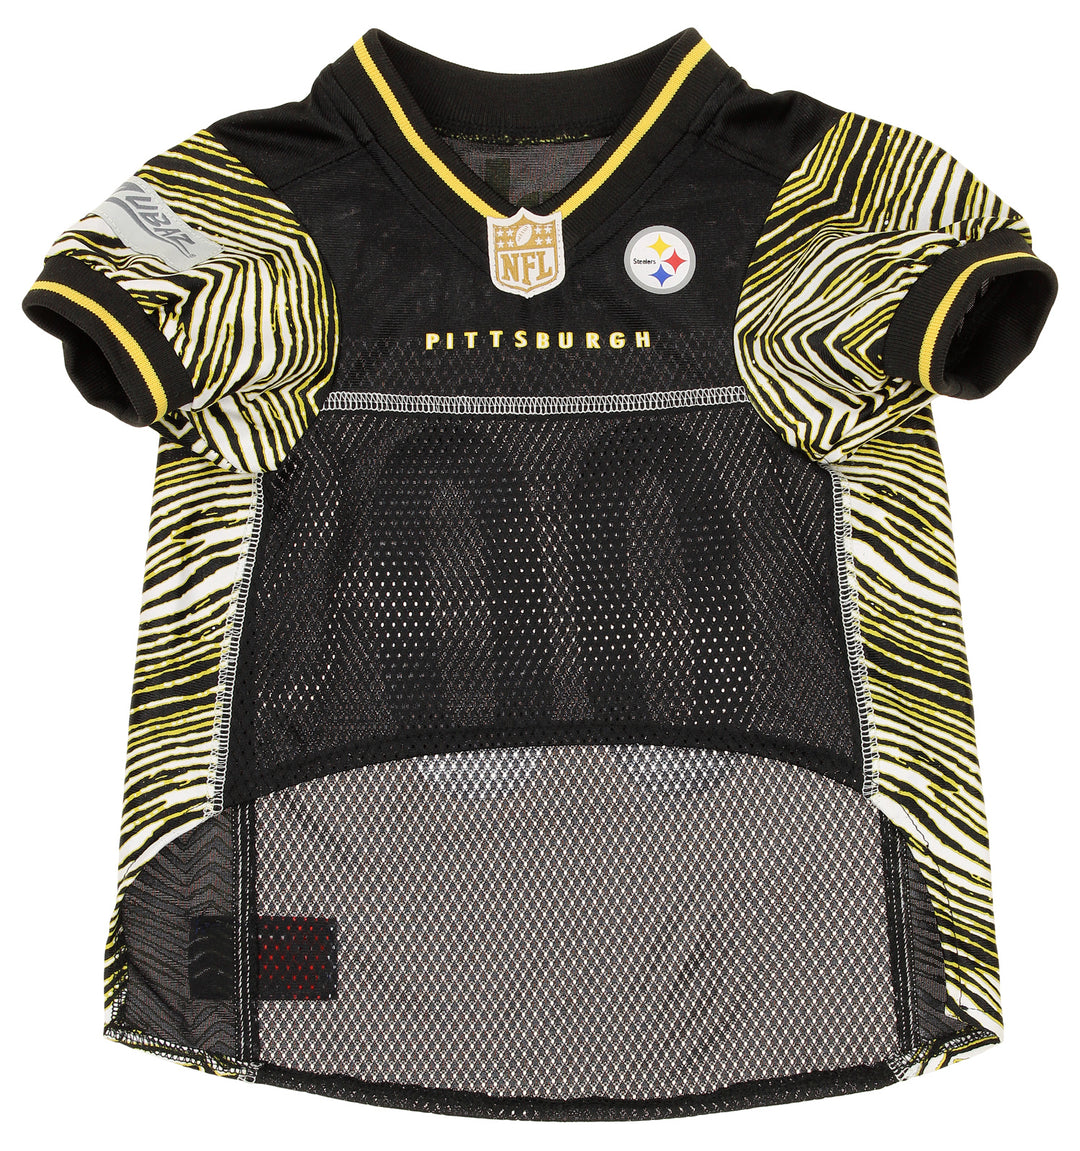 Zubaz X Pets First NFL Pittsburgh Steelers Team Pet Jersey For Dogs